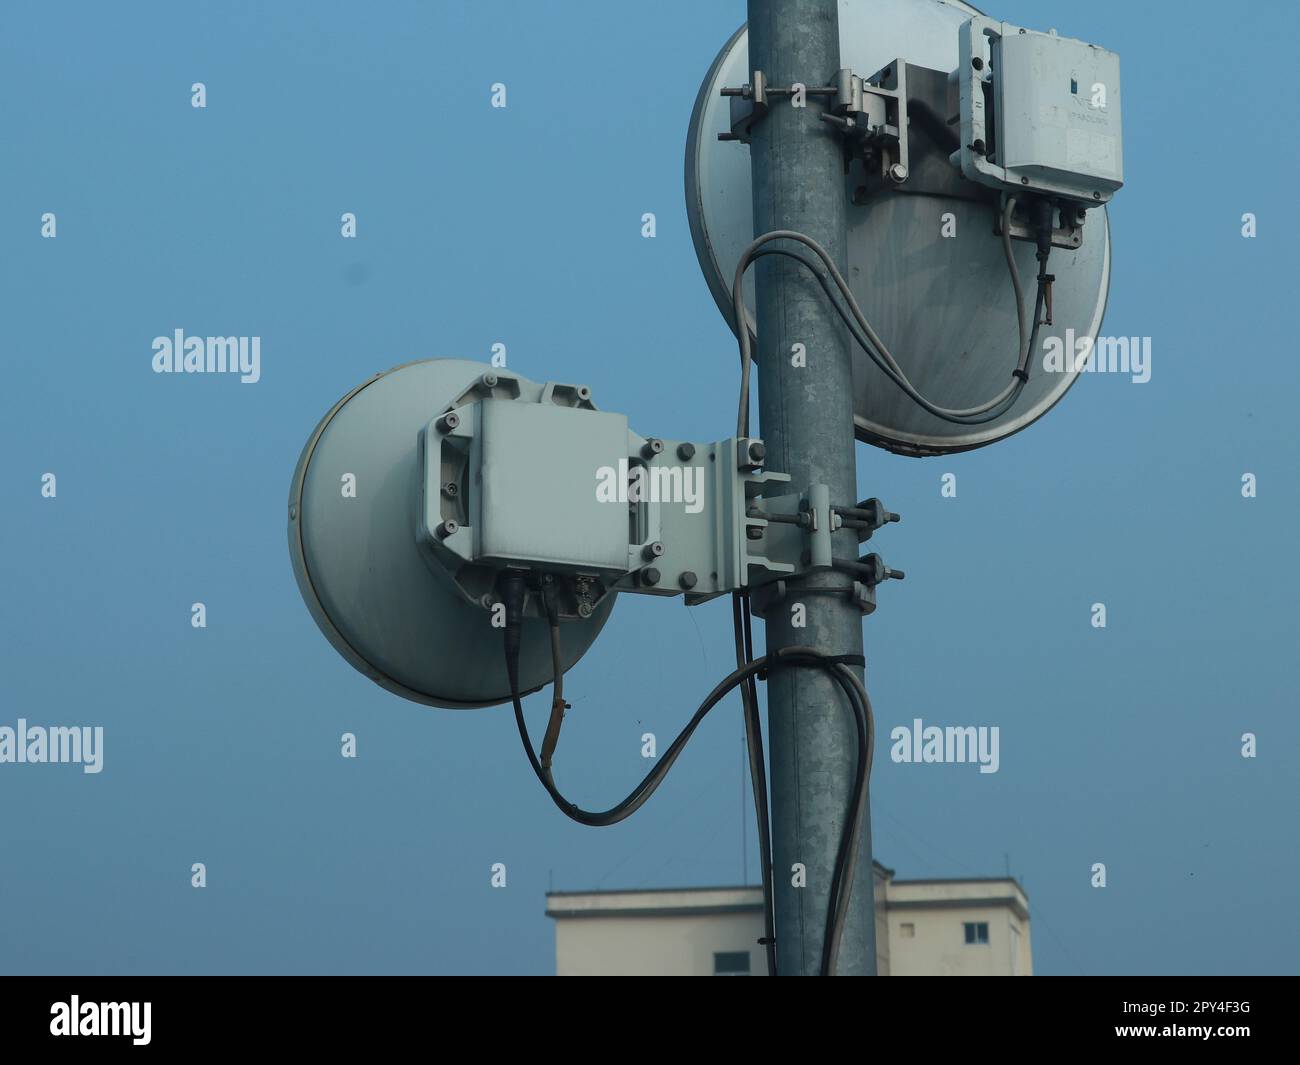 Microwave radio Link antenna mounted on a radio tower with blue sky in the background side view portrait Stock Photo